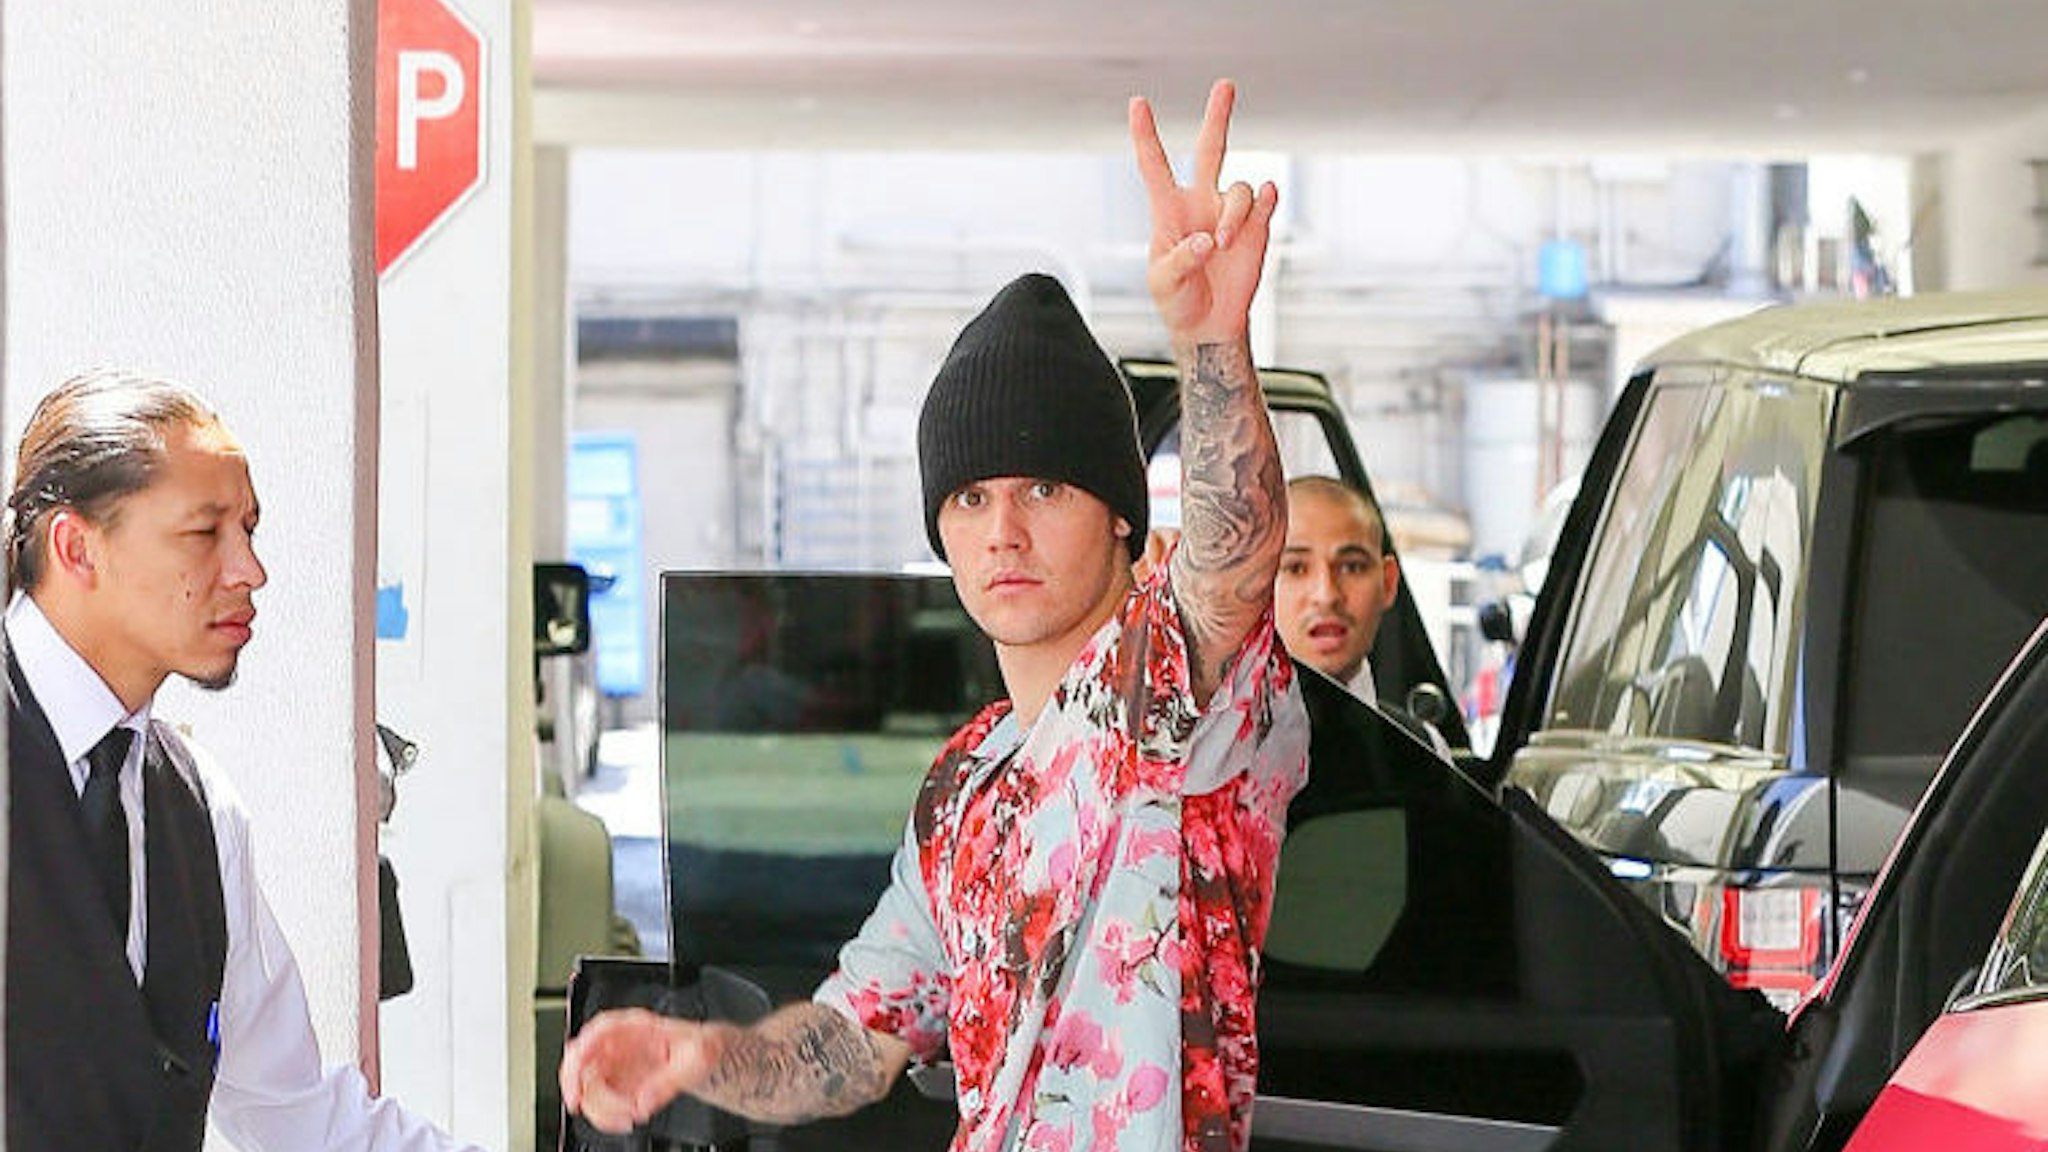 Justin Bieber is seen on August 29, 2019 in Los Angeles, California. (Photo by BG022/Bauer-Griffin/GC Images)